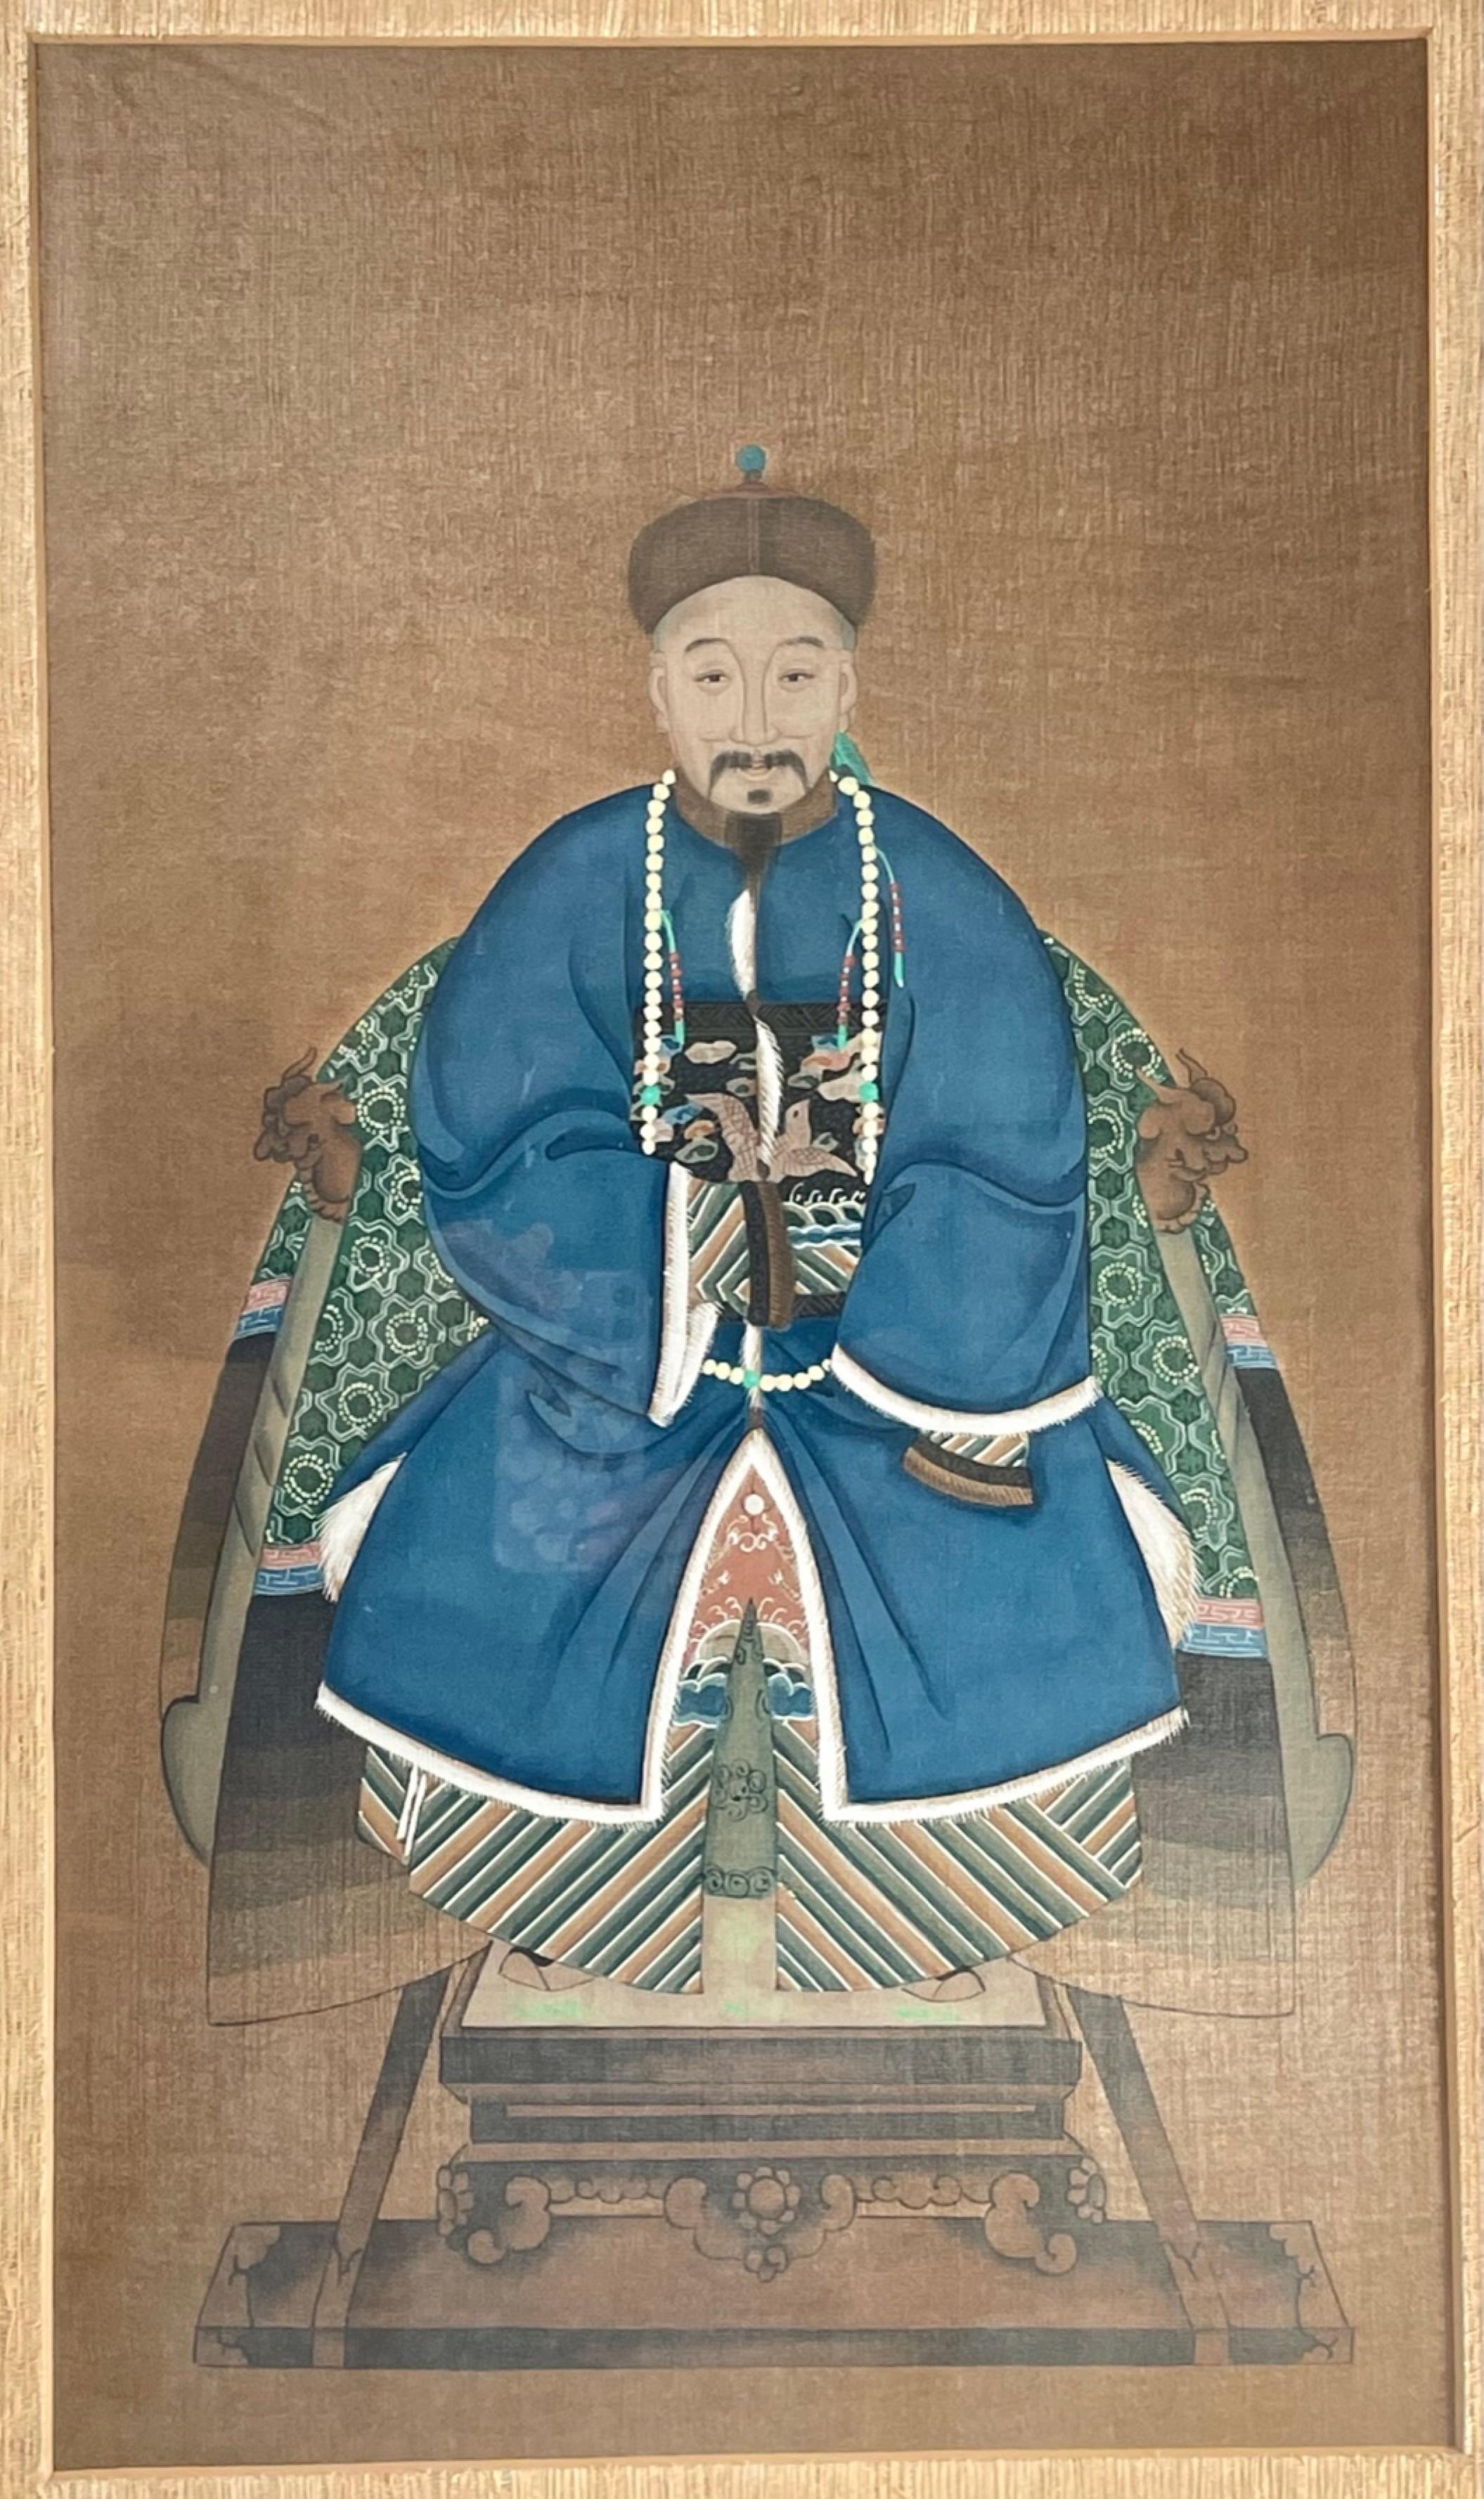 Chinese ancestor portrait of a Mandarin Dignitary. 

Antique tempera on paper painting of a Mandarin Dignitary wearing a blue court dress and seated on a throne chair. Based on the style of his formal robe, this man was probably an official of the